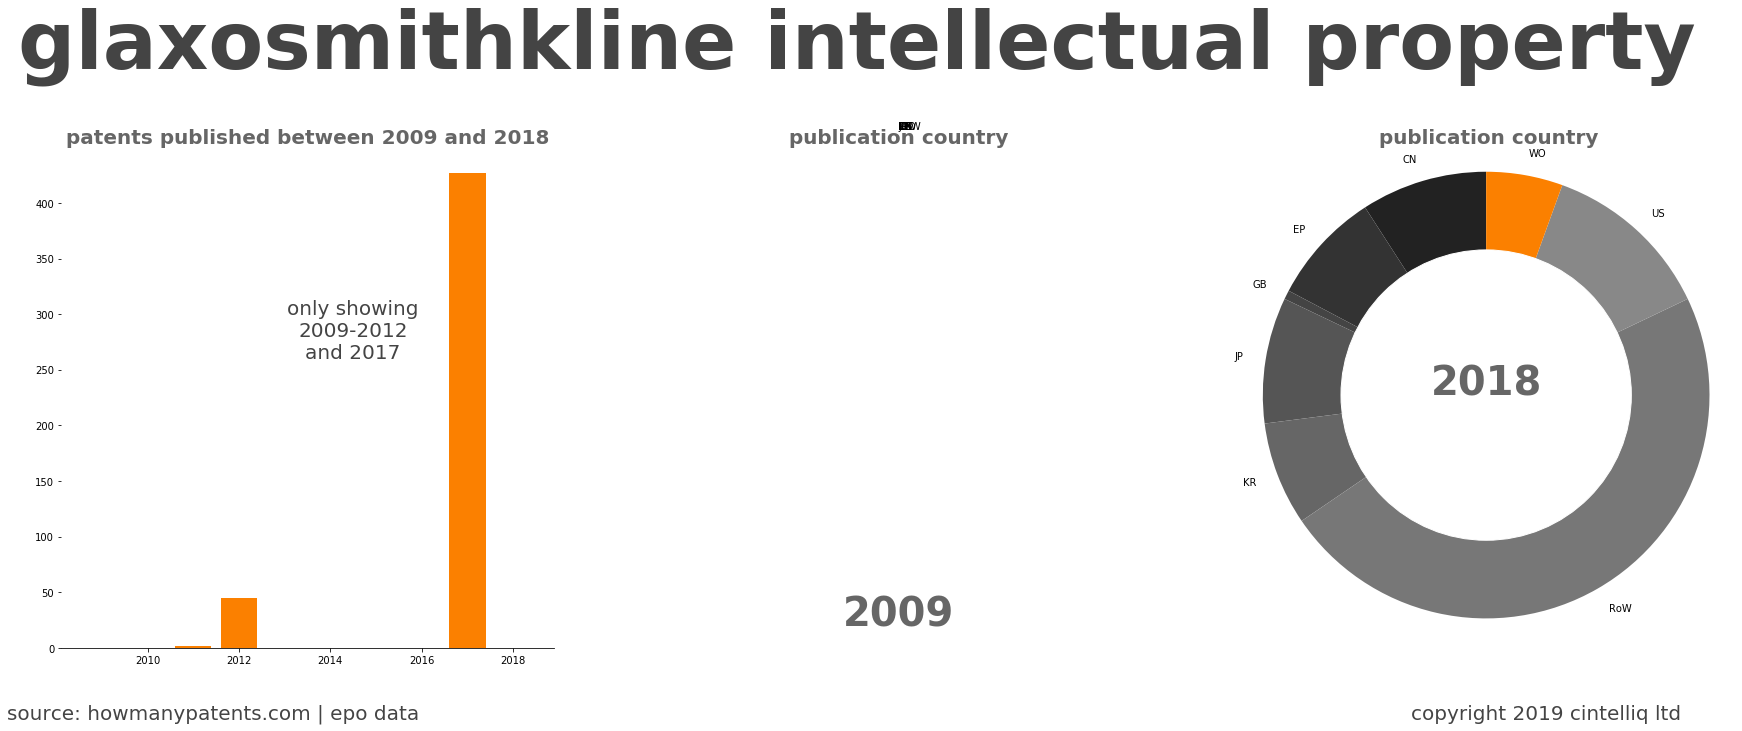 summary of patents for Glaxosmithkline Intellectual Property 